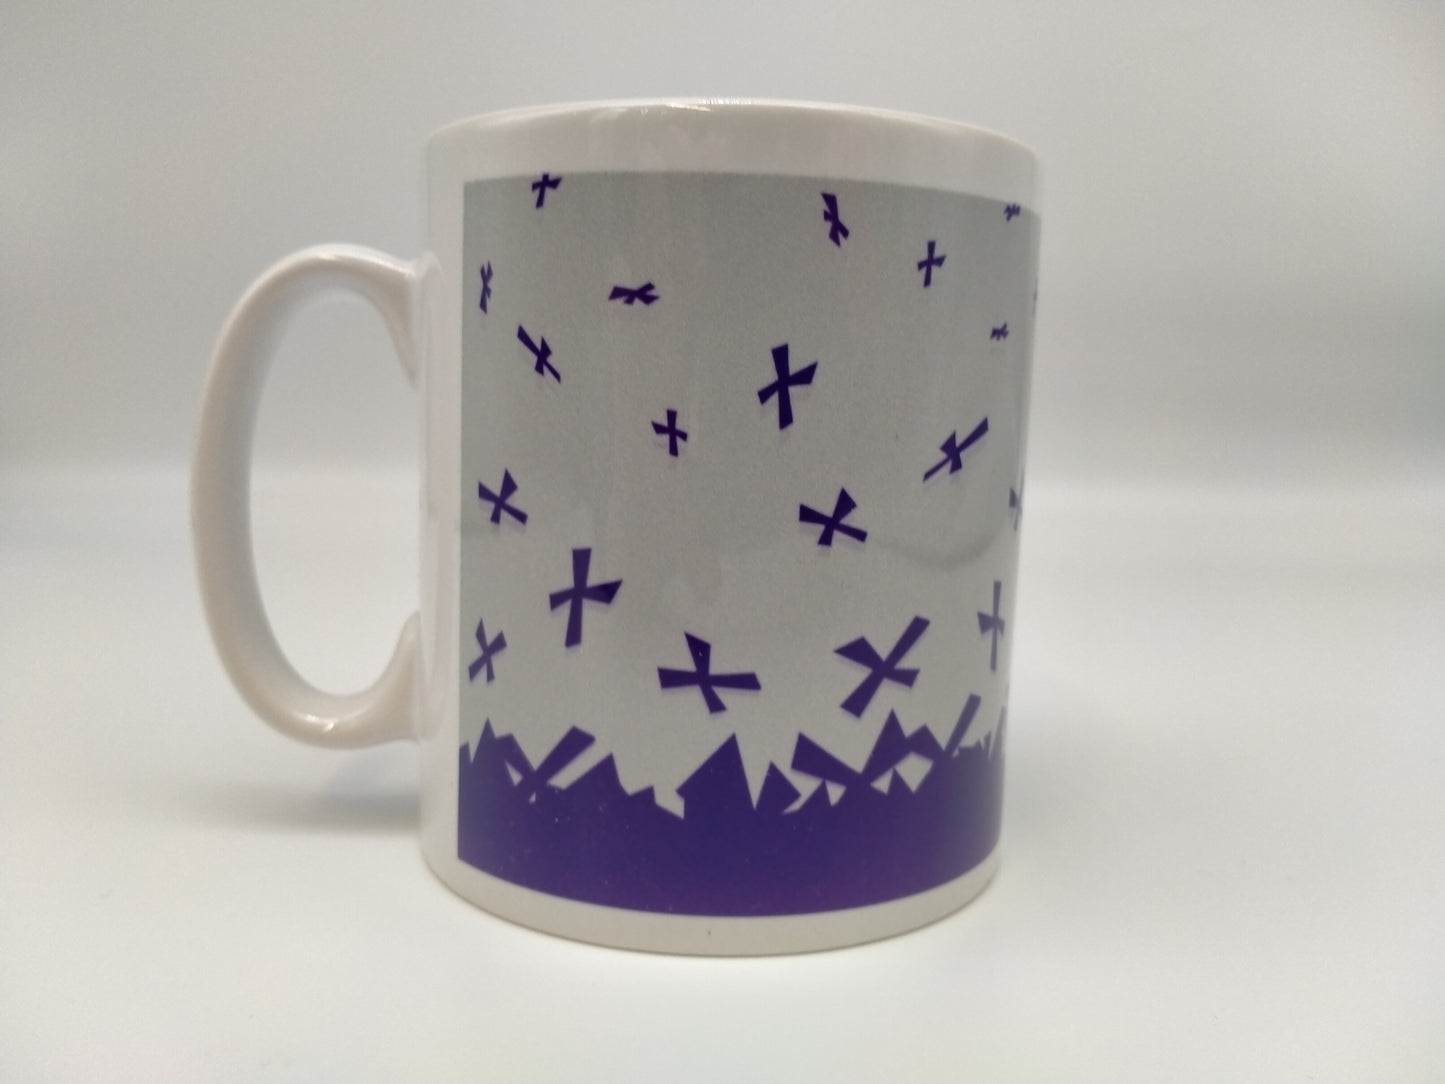 The back of the mug: purple saltires on gray background.